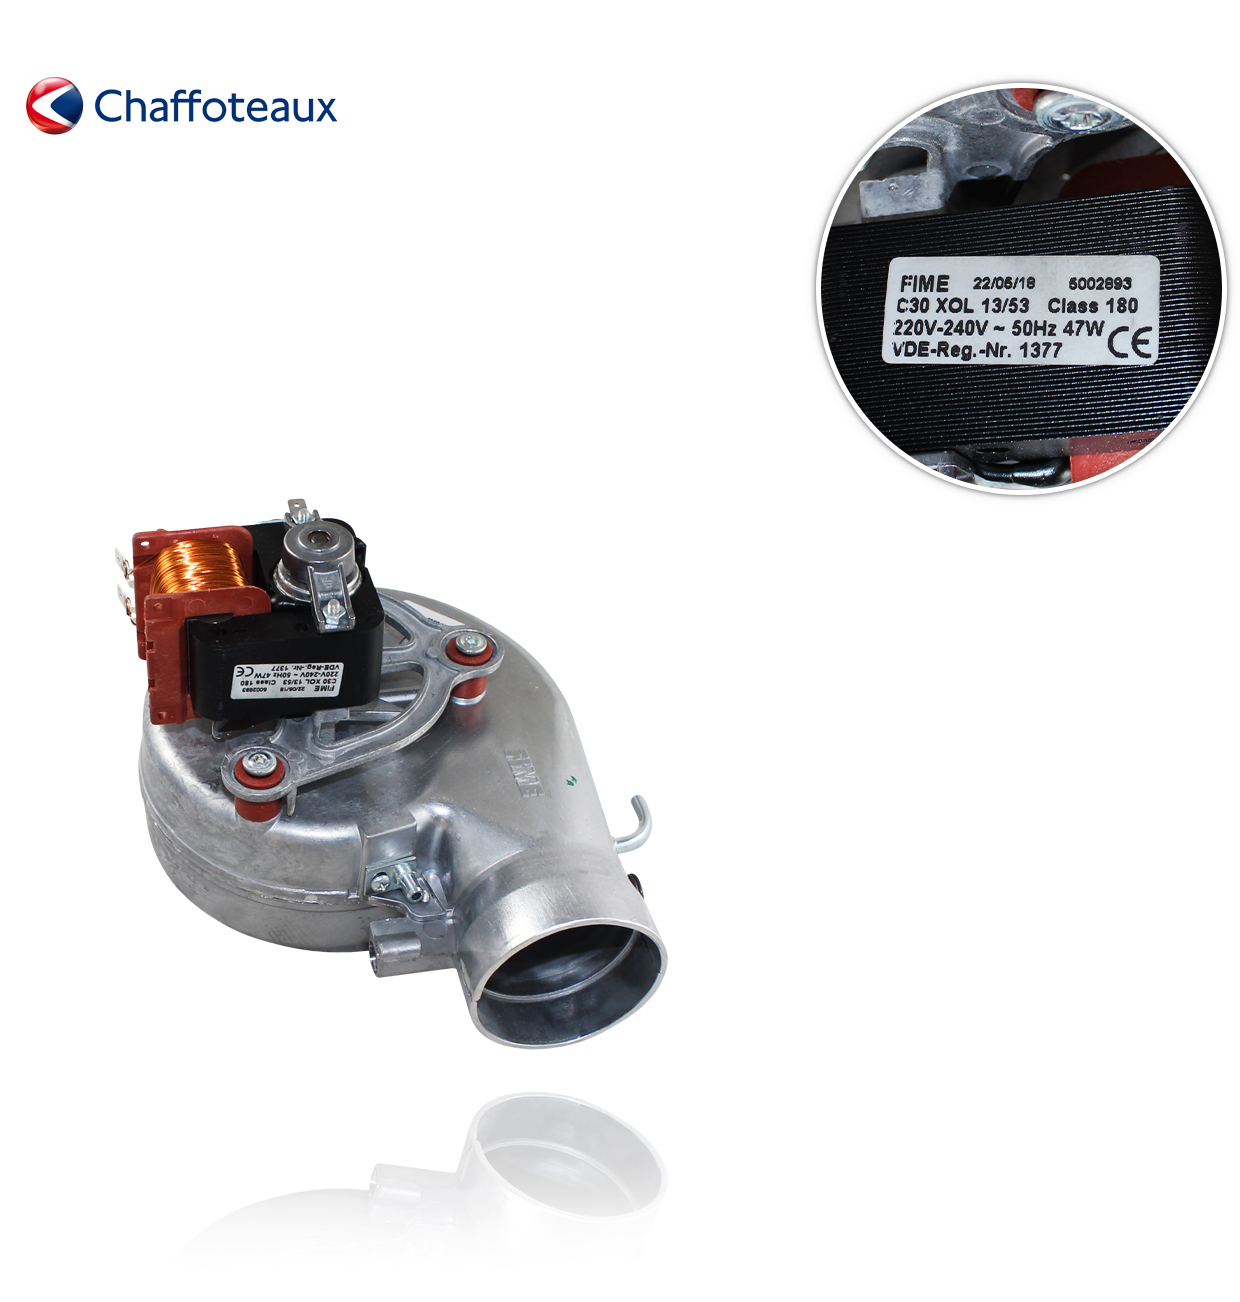 1V 24FF EXTRACTOR CHAFFOTEAUX 61310933